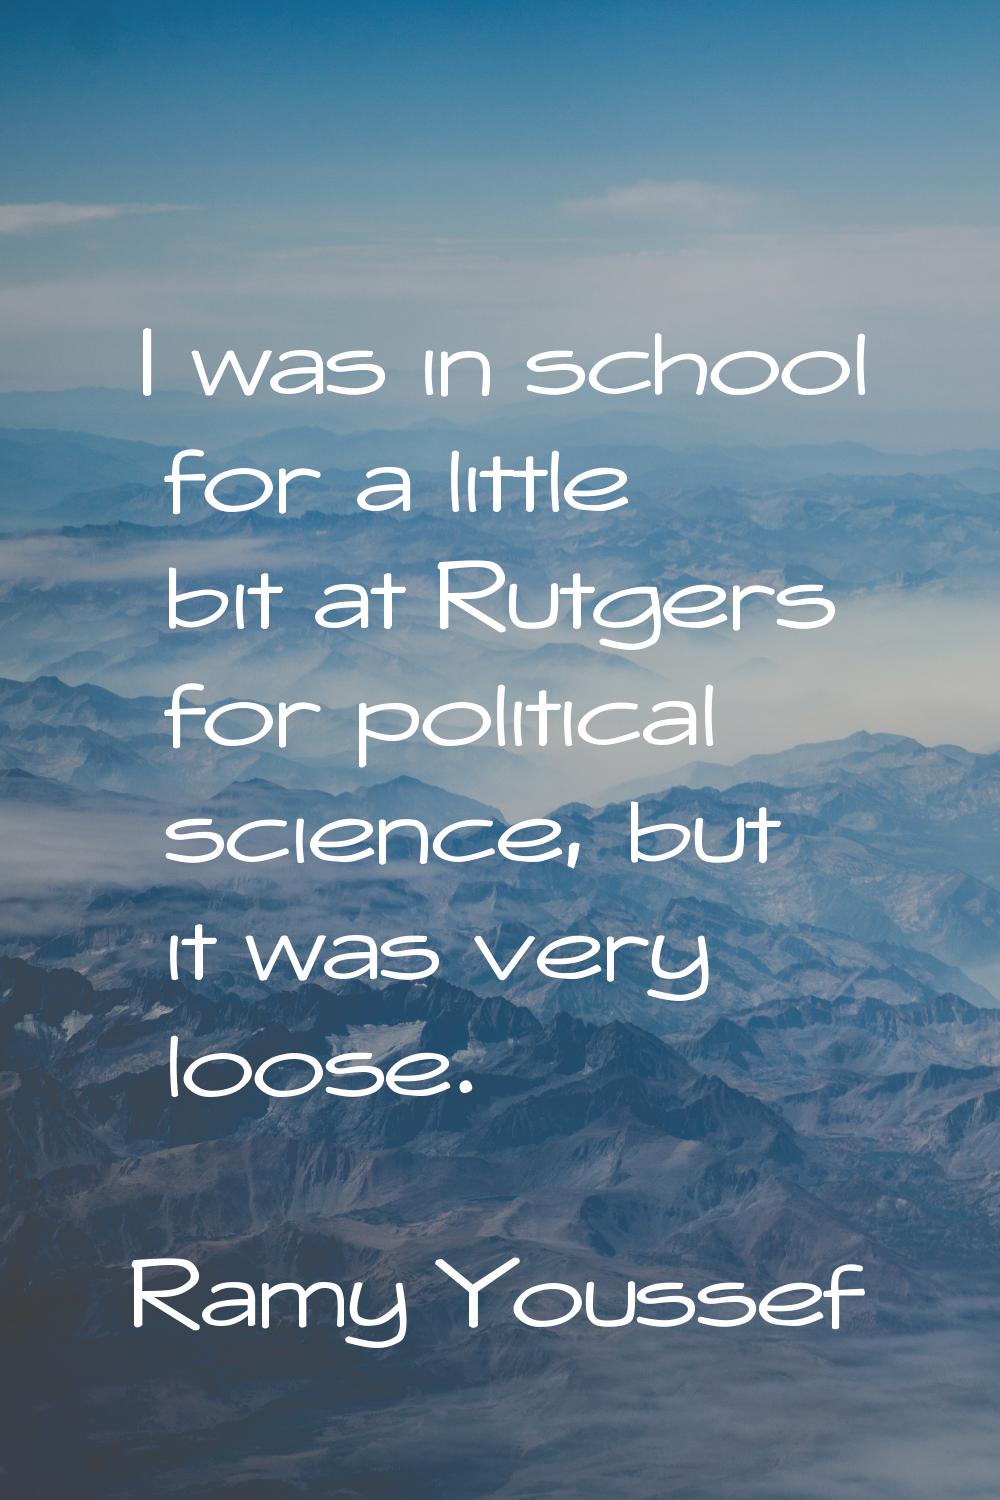 I was in school for a little bit at Rutgers for political science, but it was very loose.